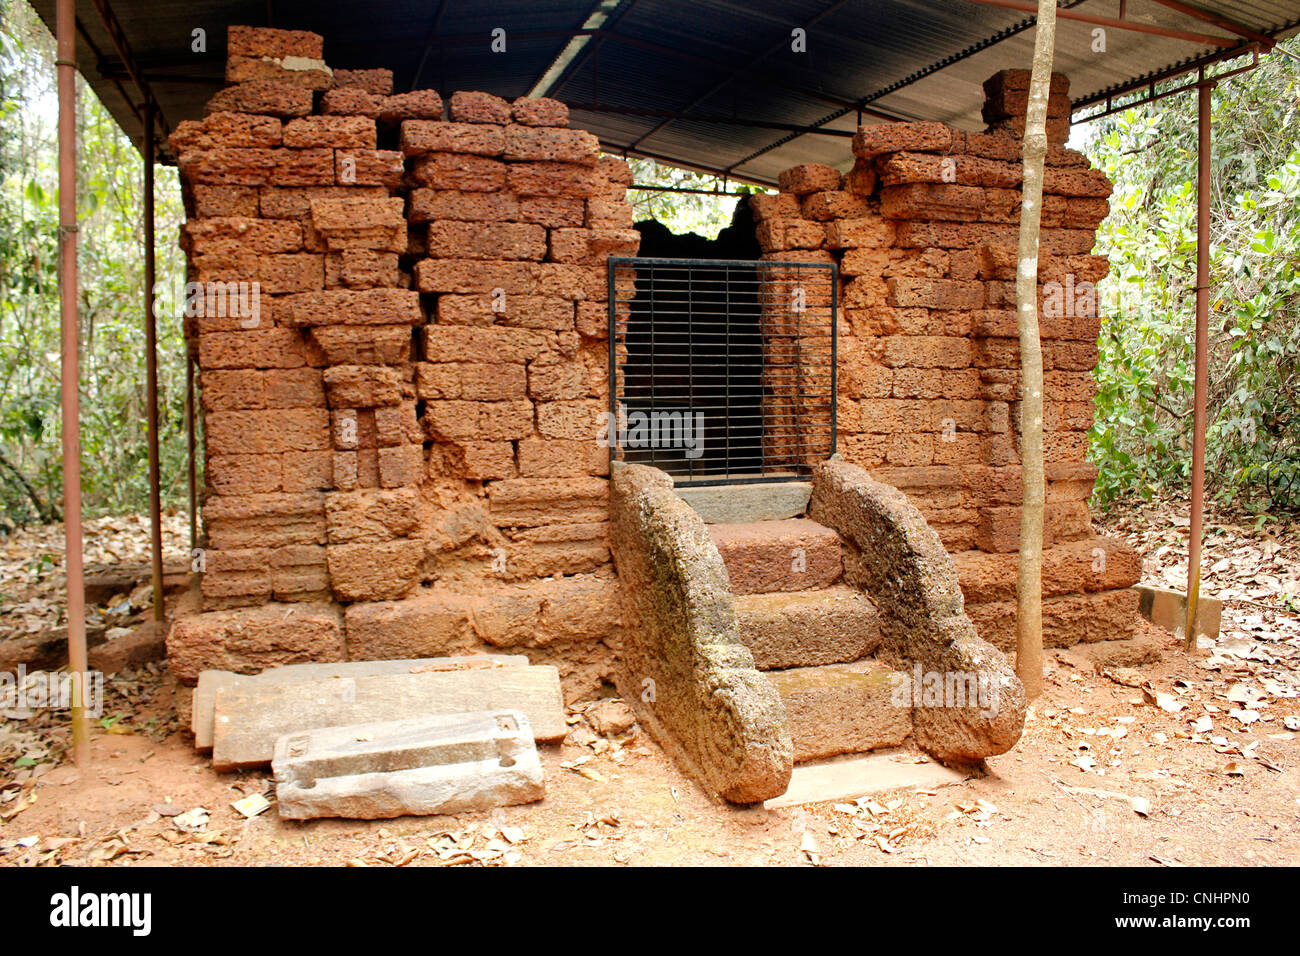 old dilapidated shiva temple in an interior rural village in kerala, india Stock Photo